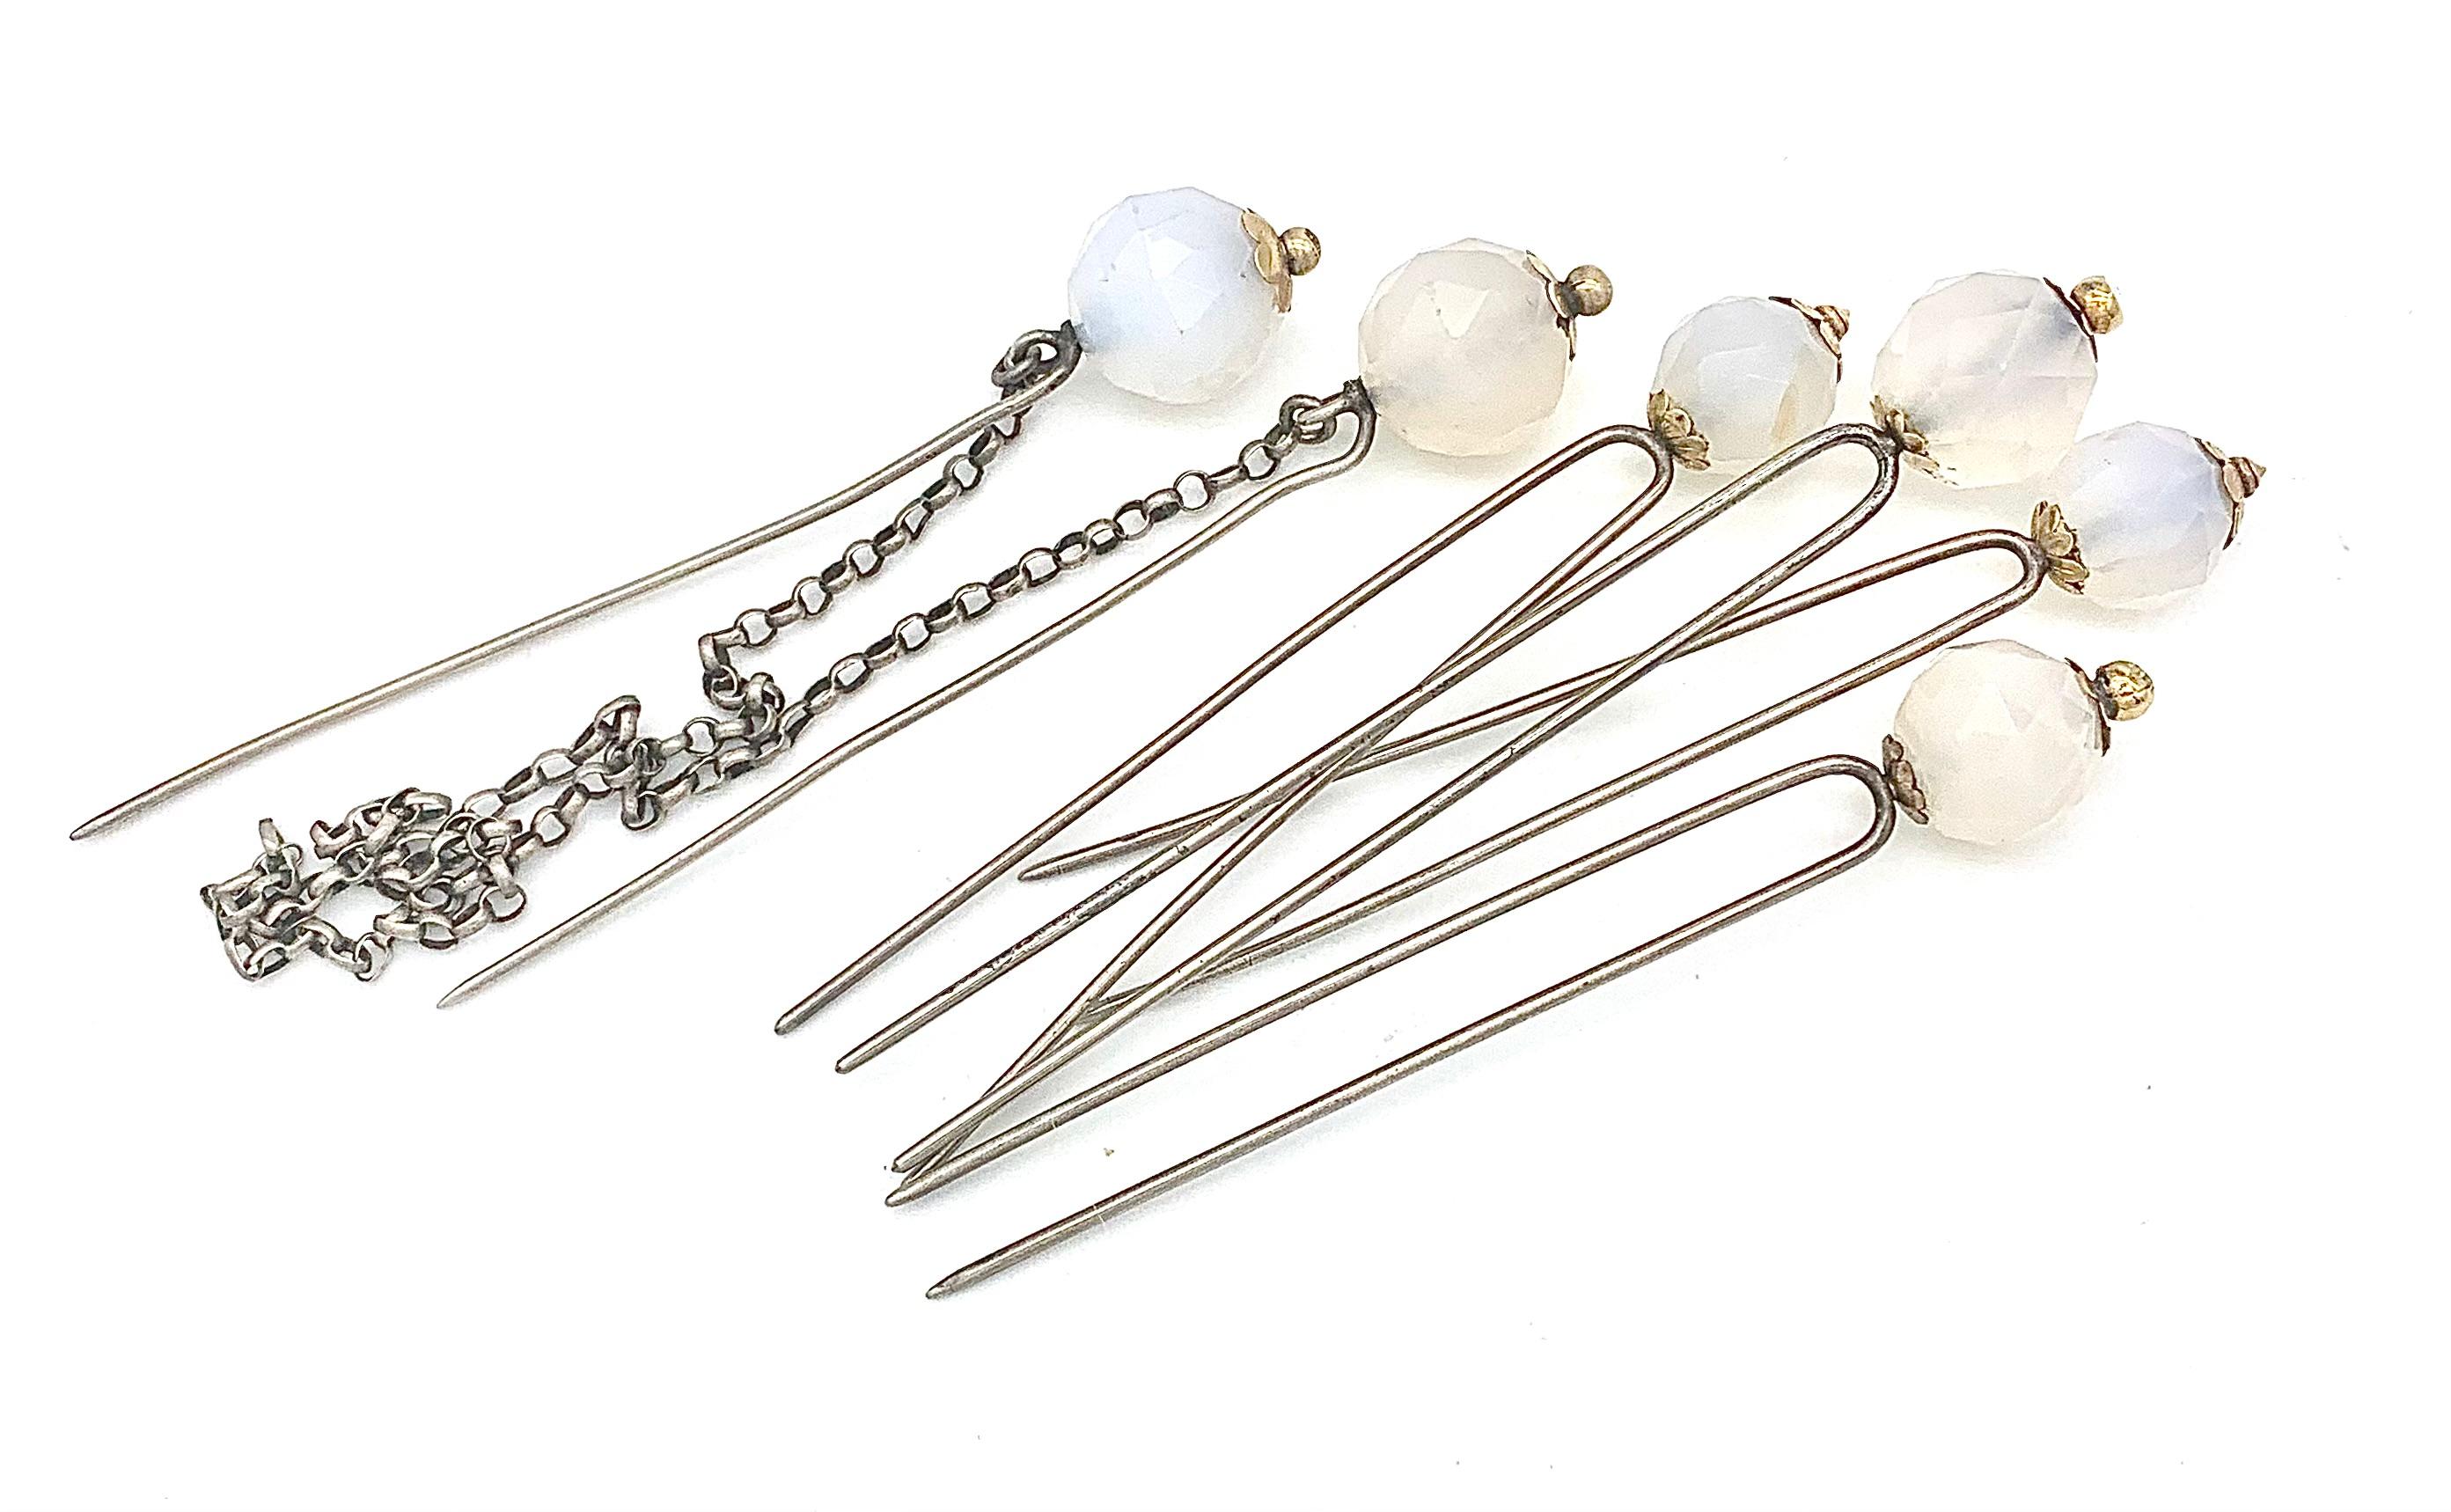 These unusual hair ornaments come as a set of four haipins with two prongs each and two pins with one prong each connected by a silver chain. All the pins are mounted with natural colour facetted chalcedony beads. The tops of all beads are decorated